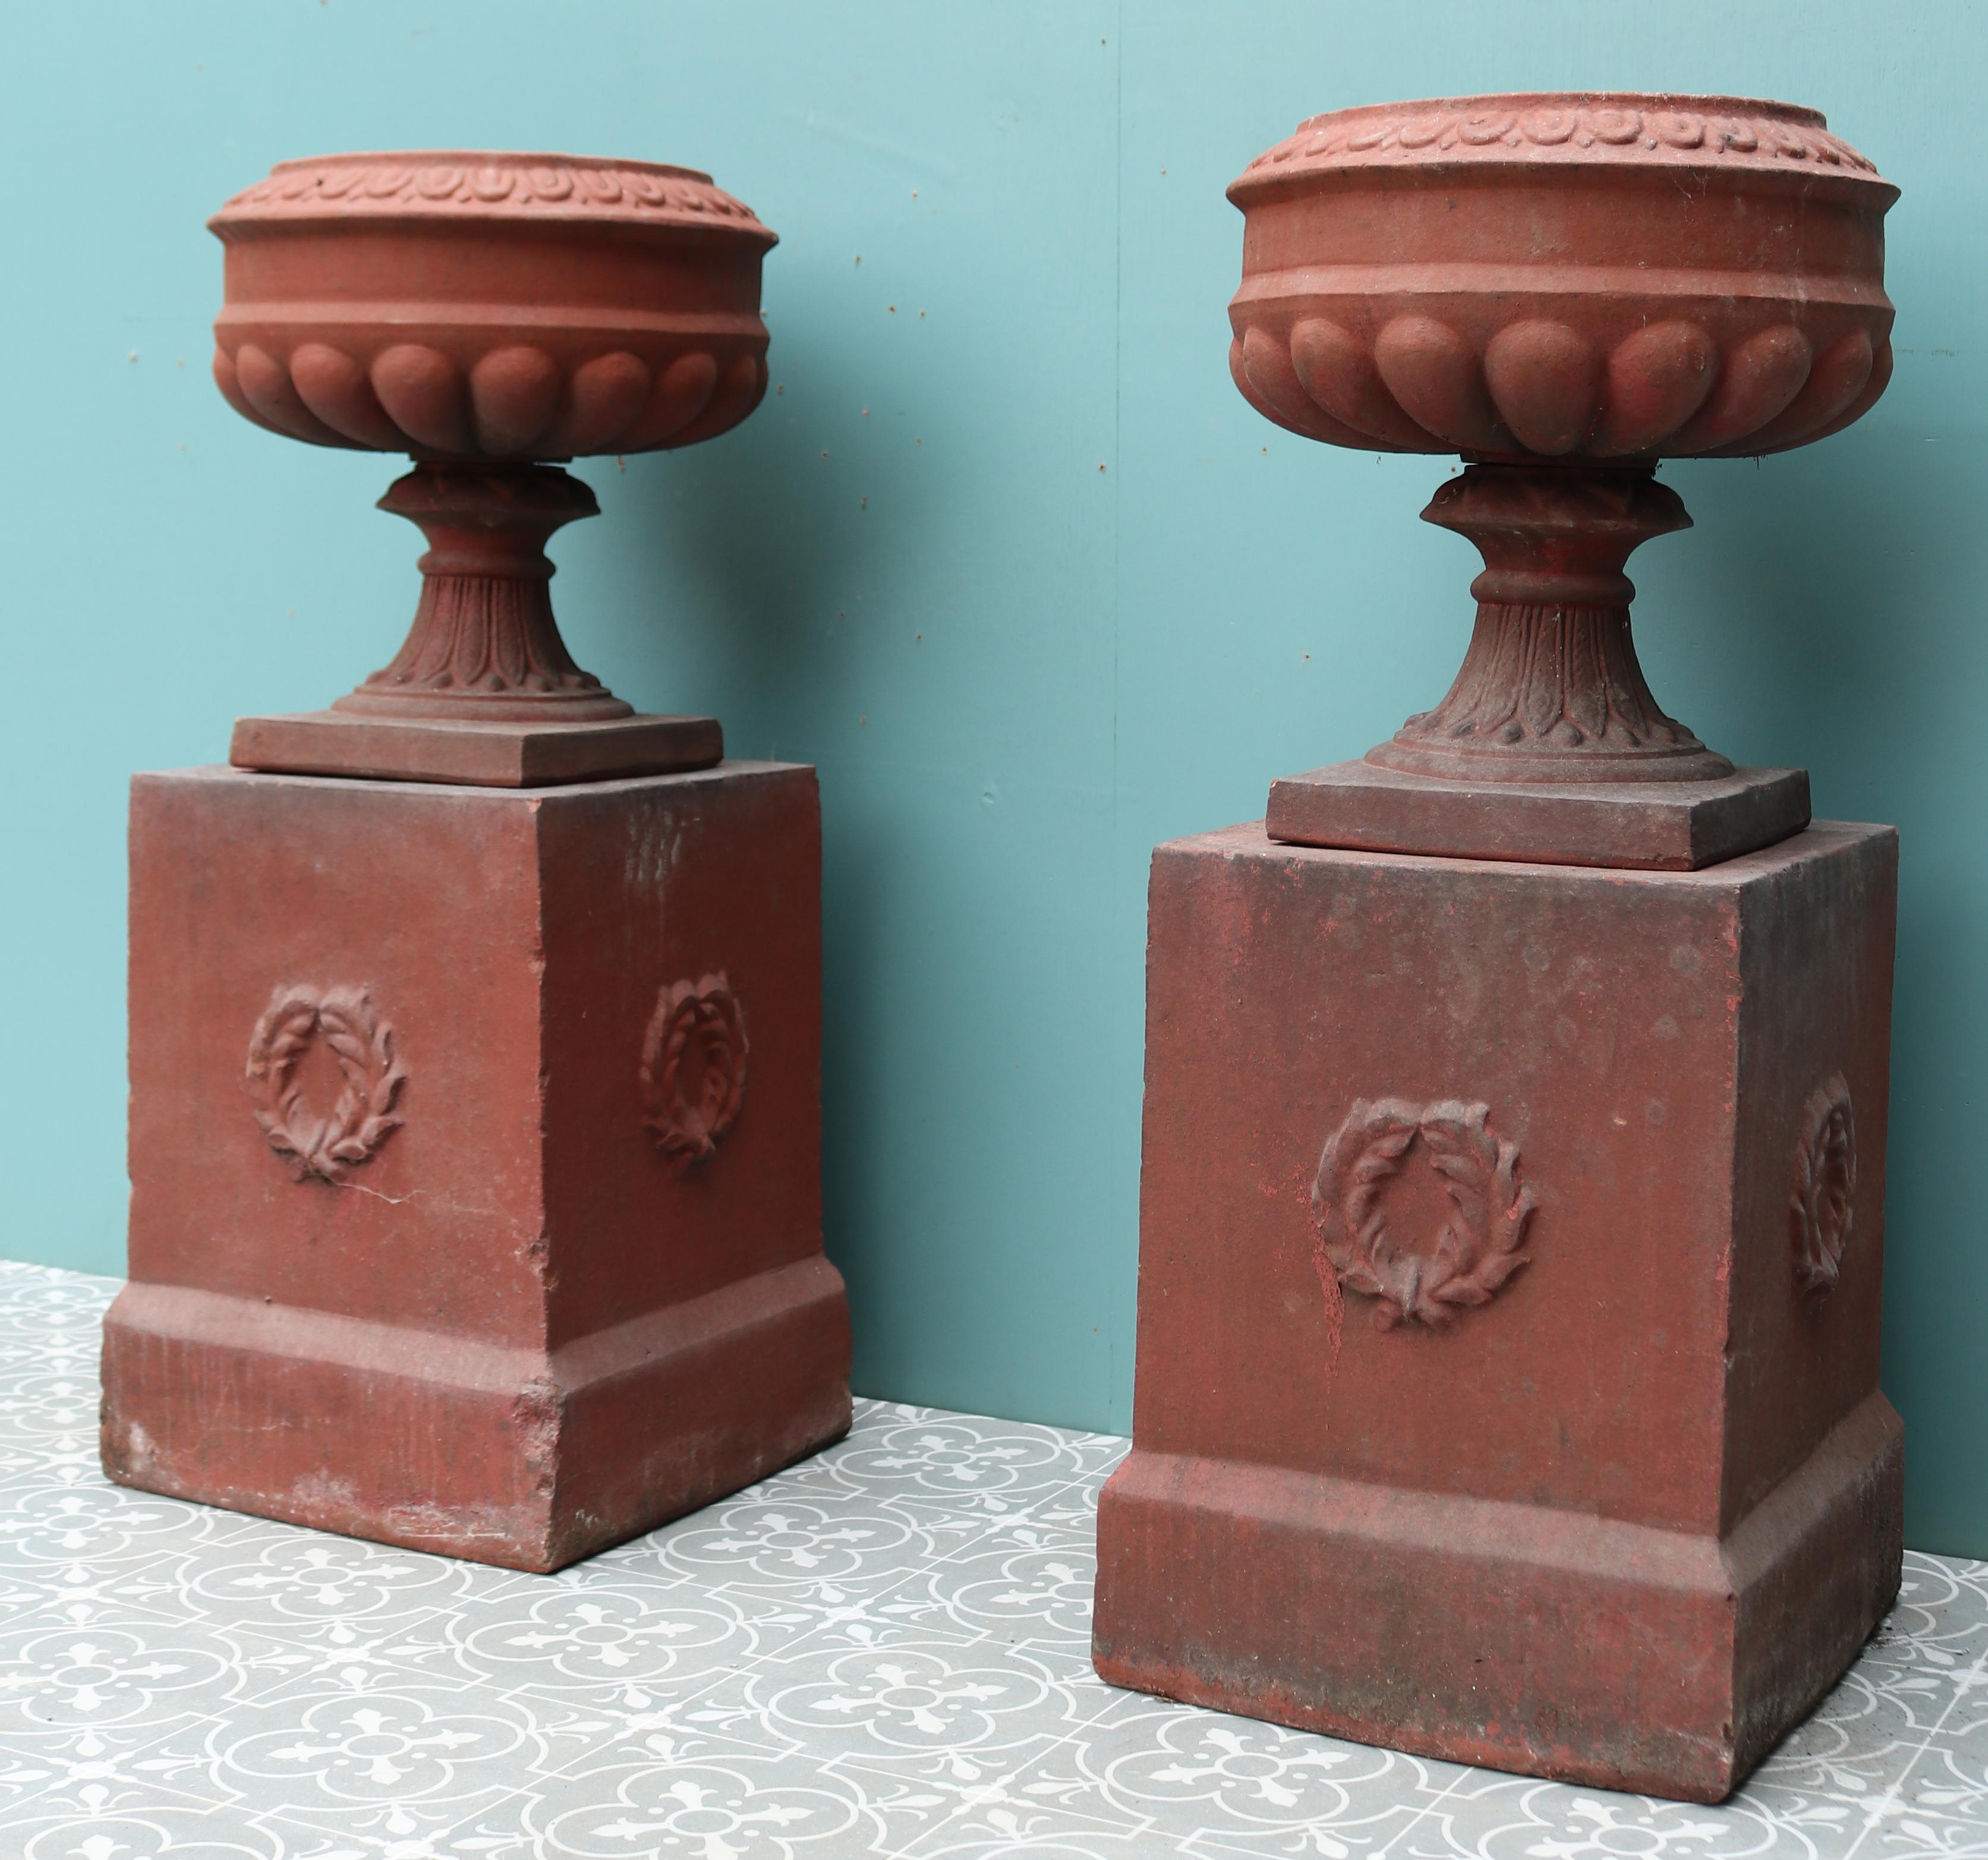 Antique Terracotta Urns with Pedestals In Fair Condition For Sale In Wormelow, Herefordshire